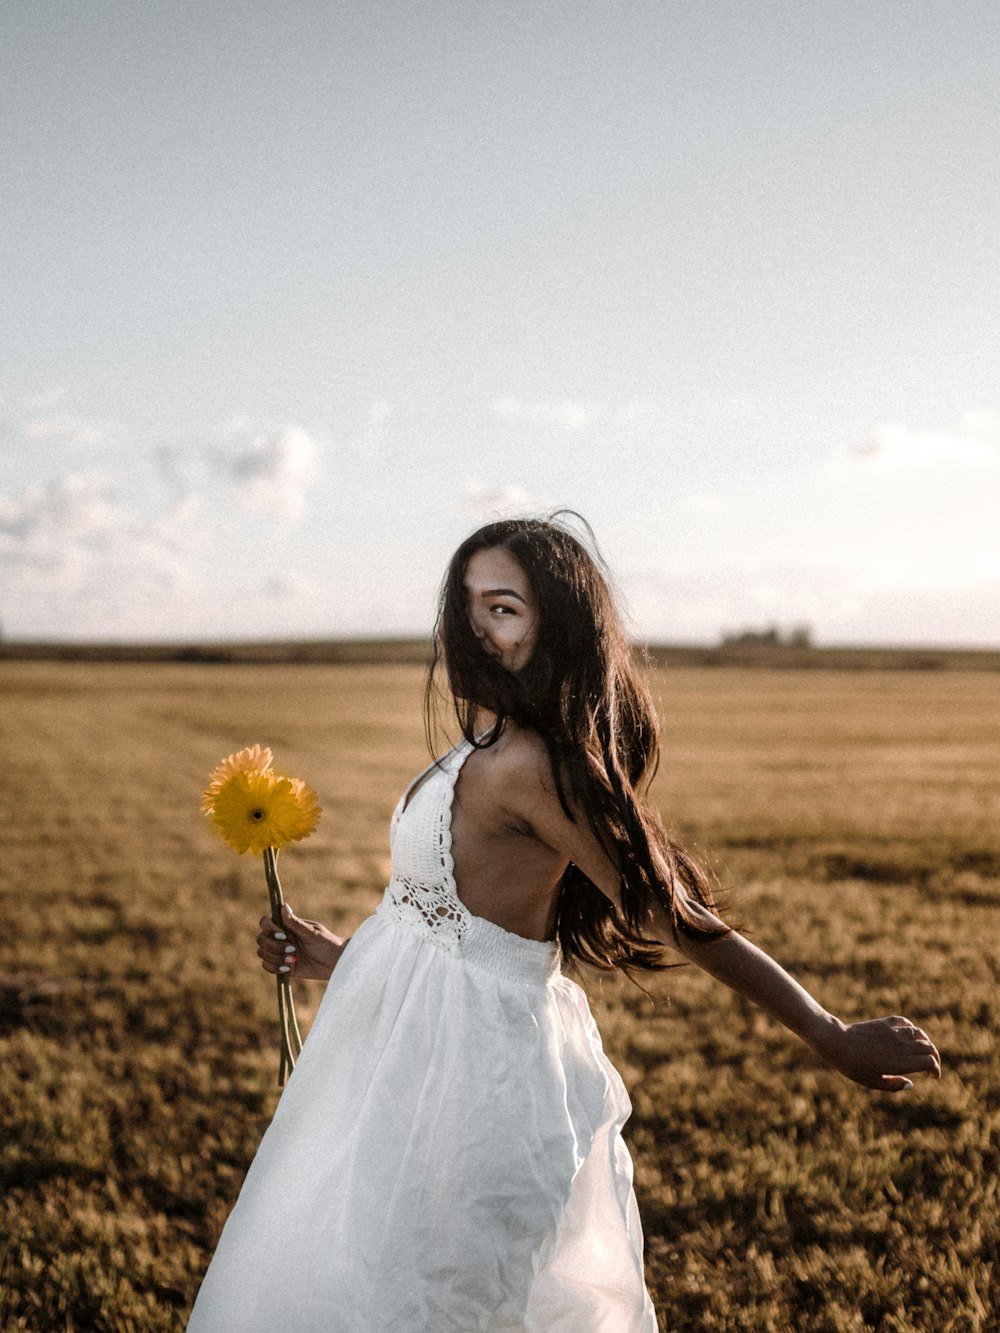 woman in white dress standing on brown grass field during daytime